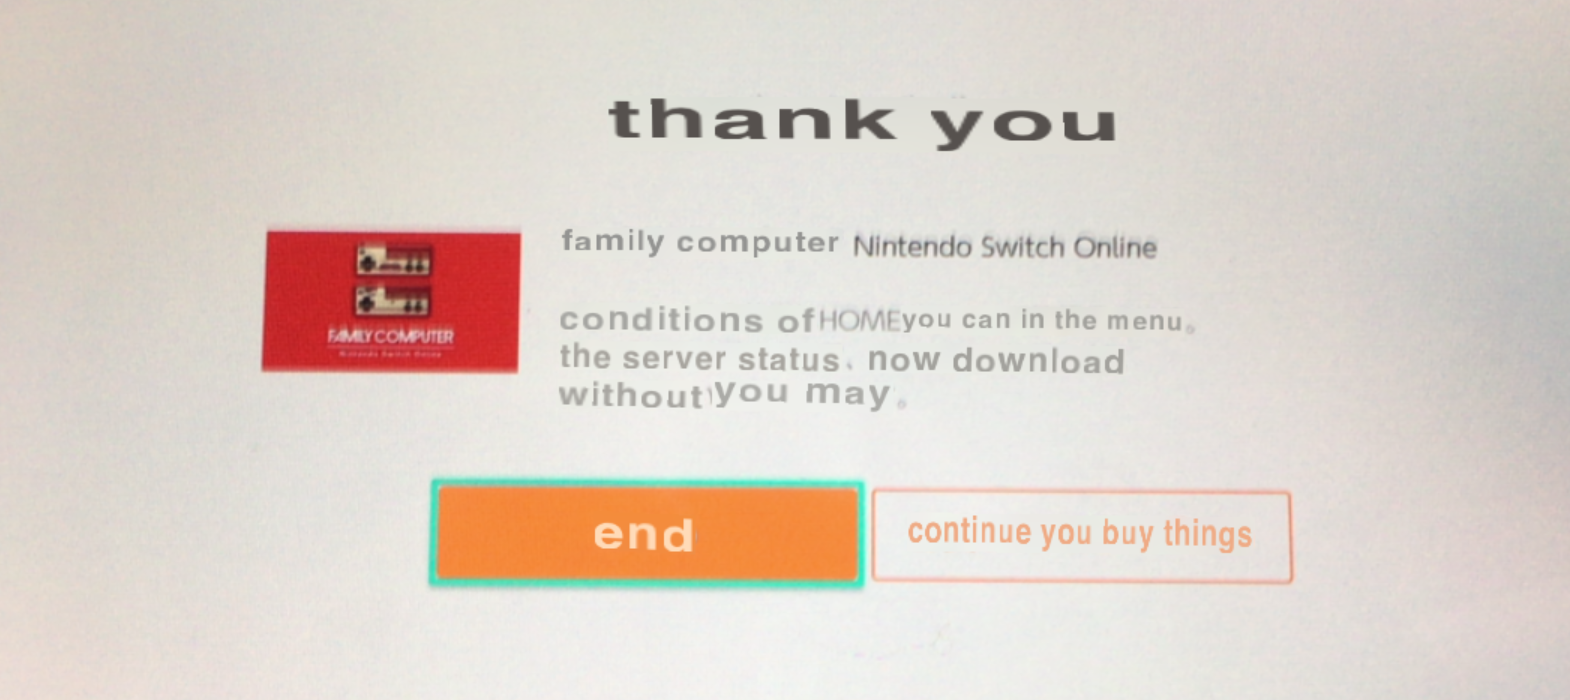 Screenshot showing a Google Translate interpretation of the order confirmation dialog with the left-hand button translated as end and the right-hand button translated as continue you buy things.